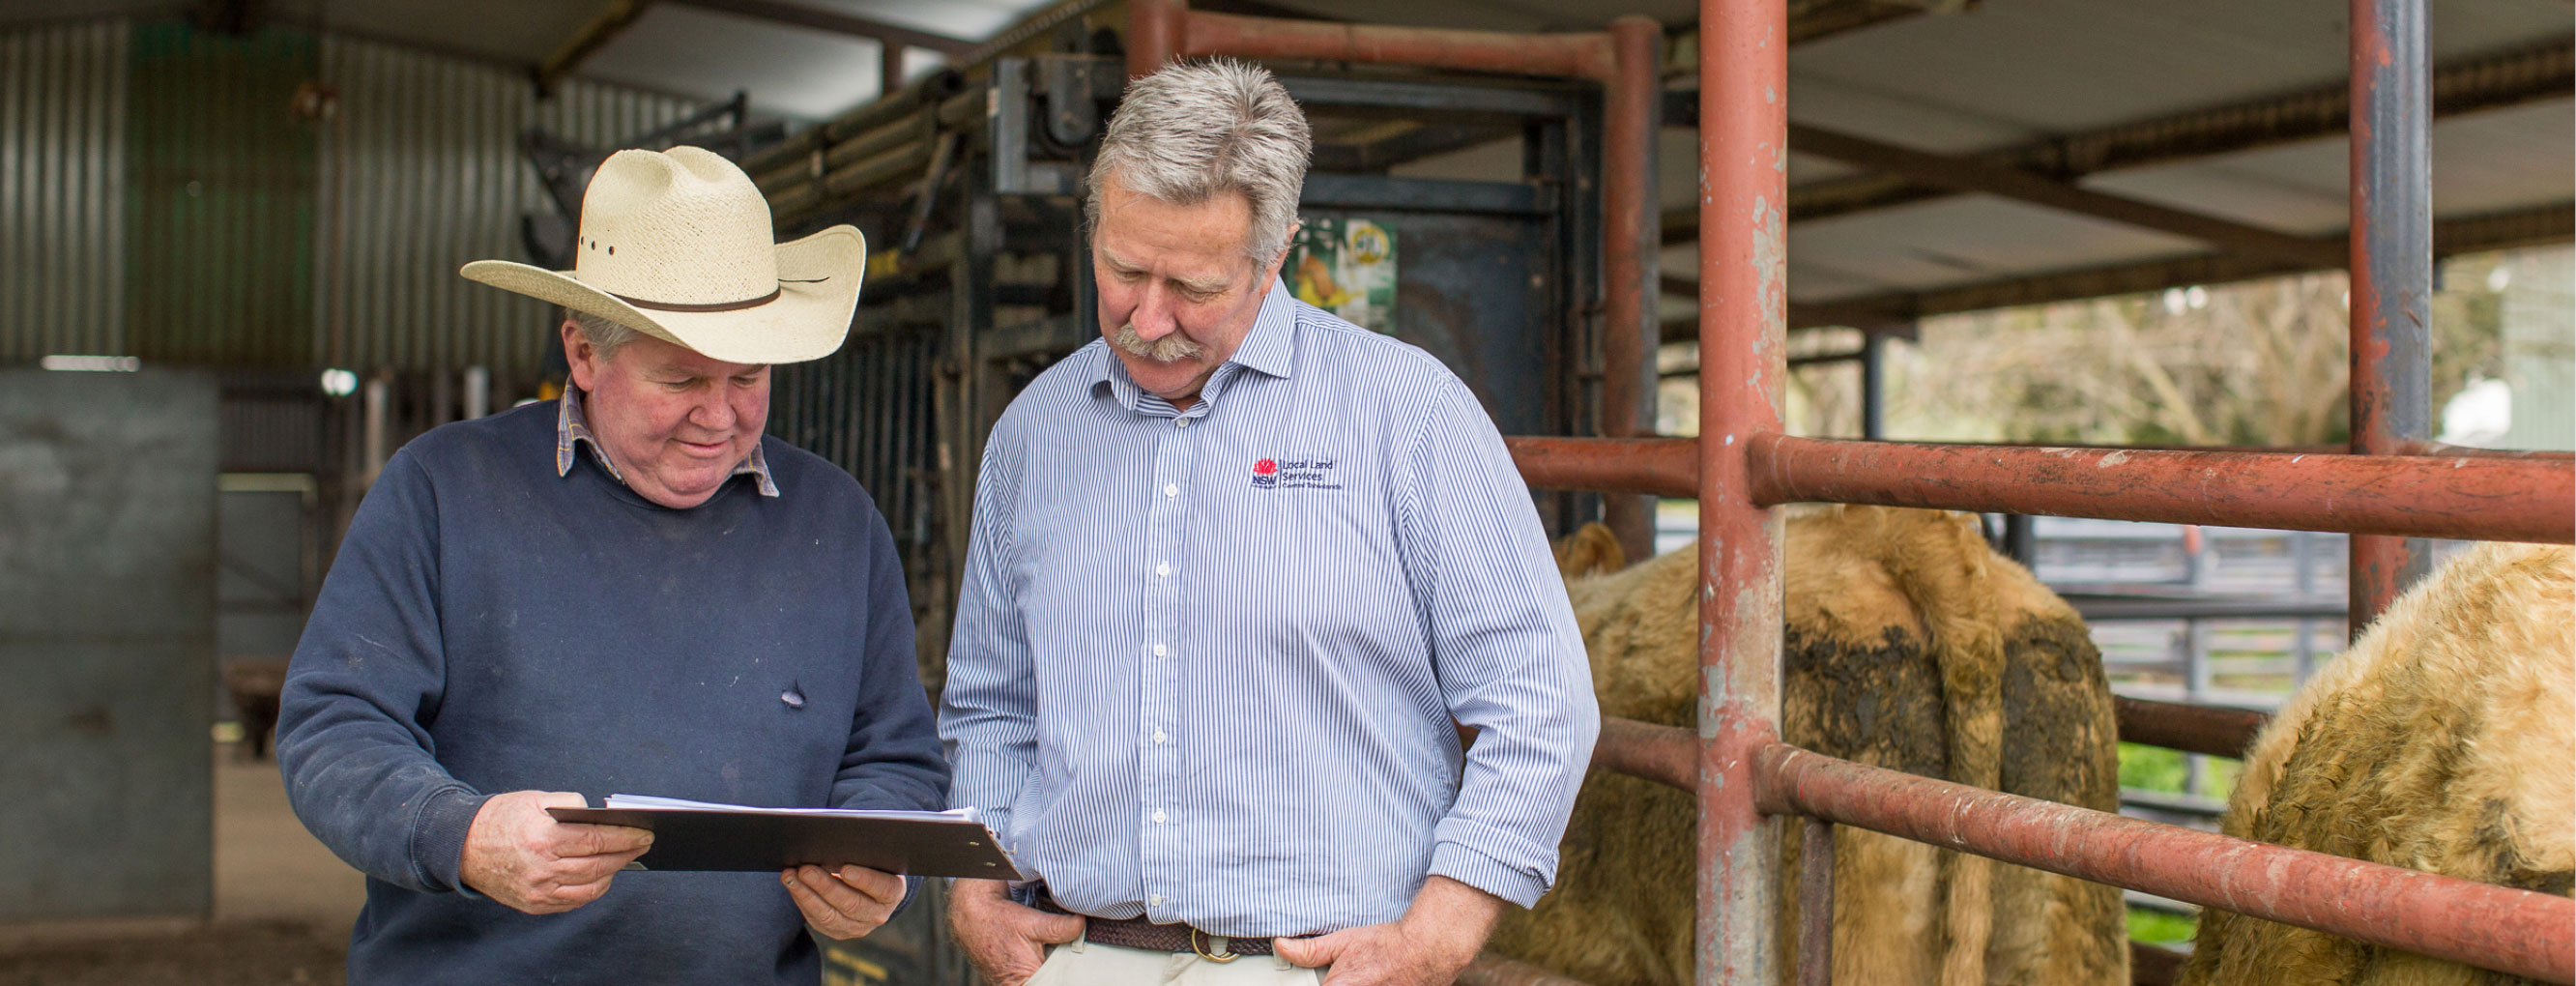 Two men standing in some cattle yards looking at a clipboard.